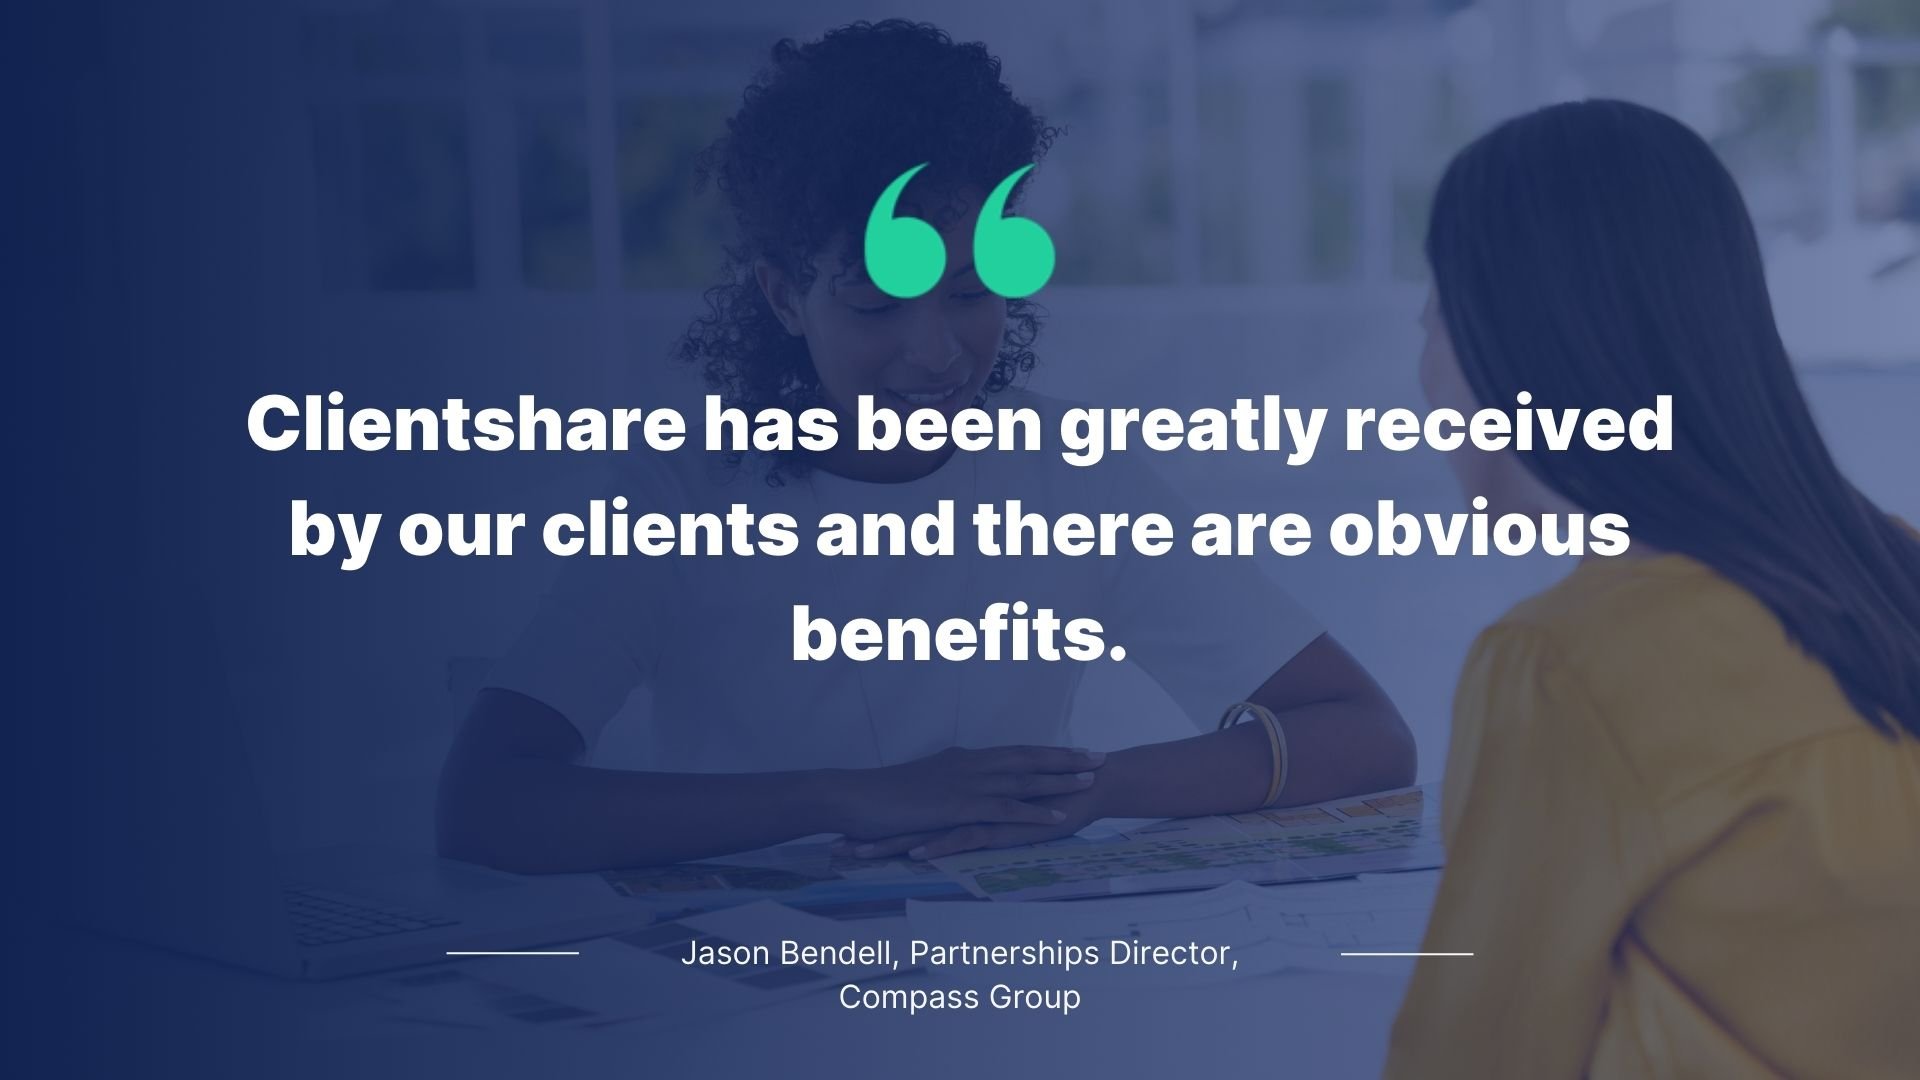 Quote by Jason Bendell, Partnership Director, Compass Group: Clientshare has been greatly received by our clients and there are obvious benefits.